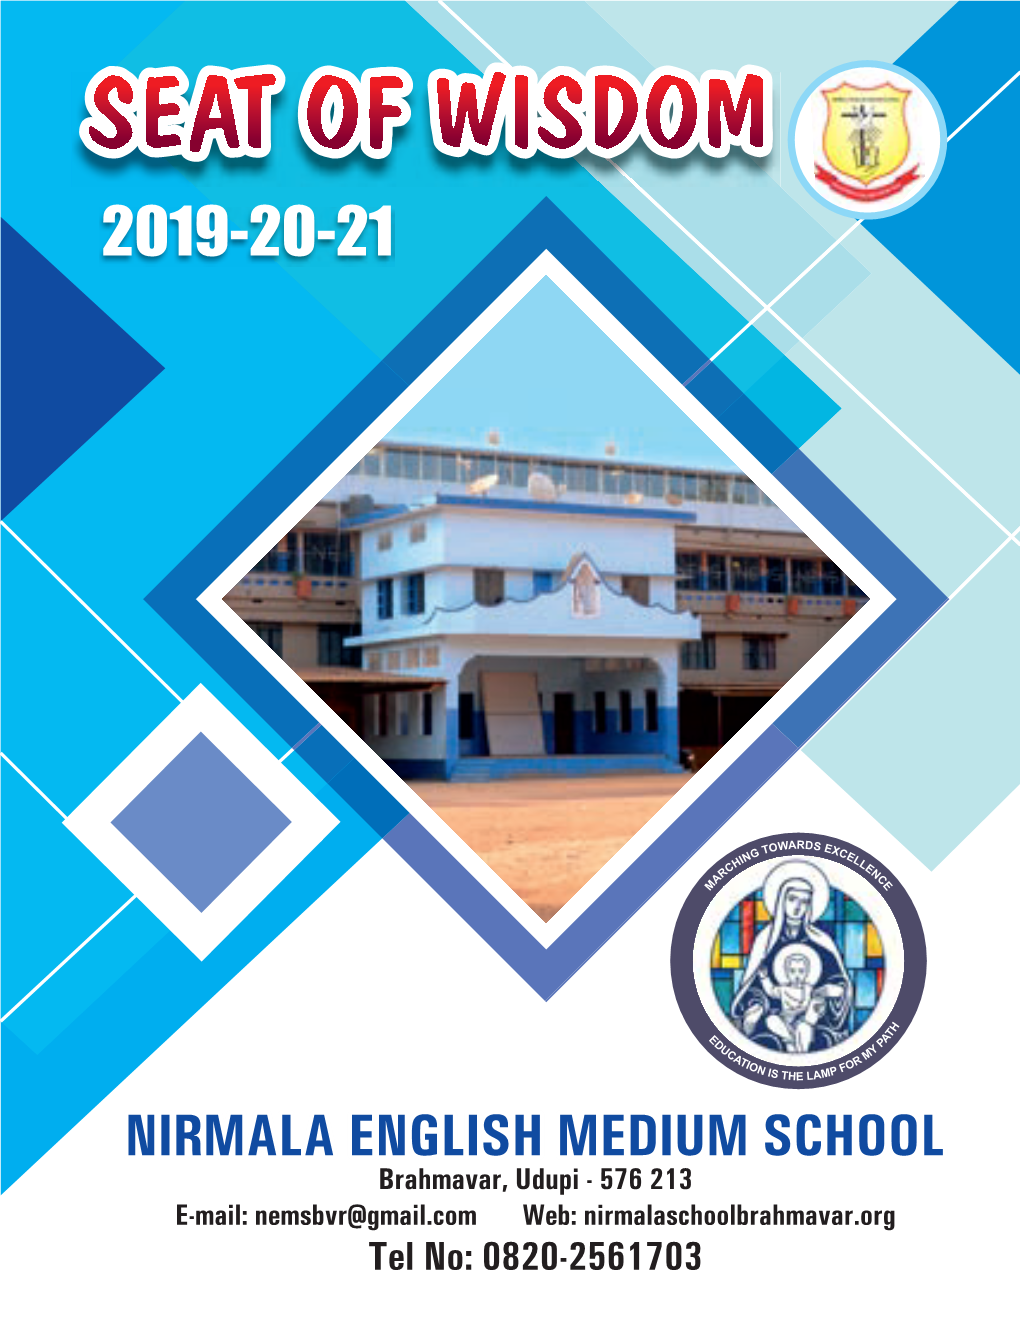 Annual Report of the Academic Year 2019-20